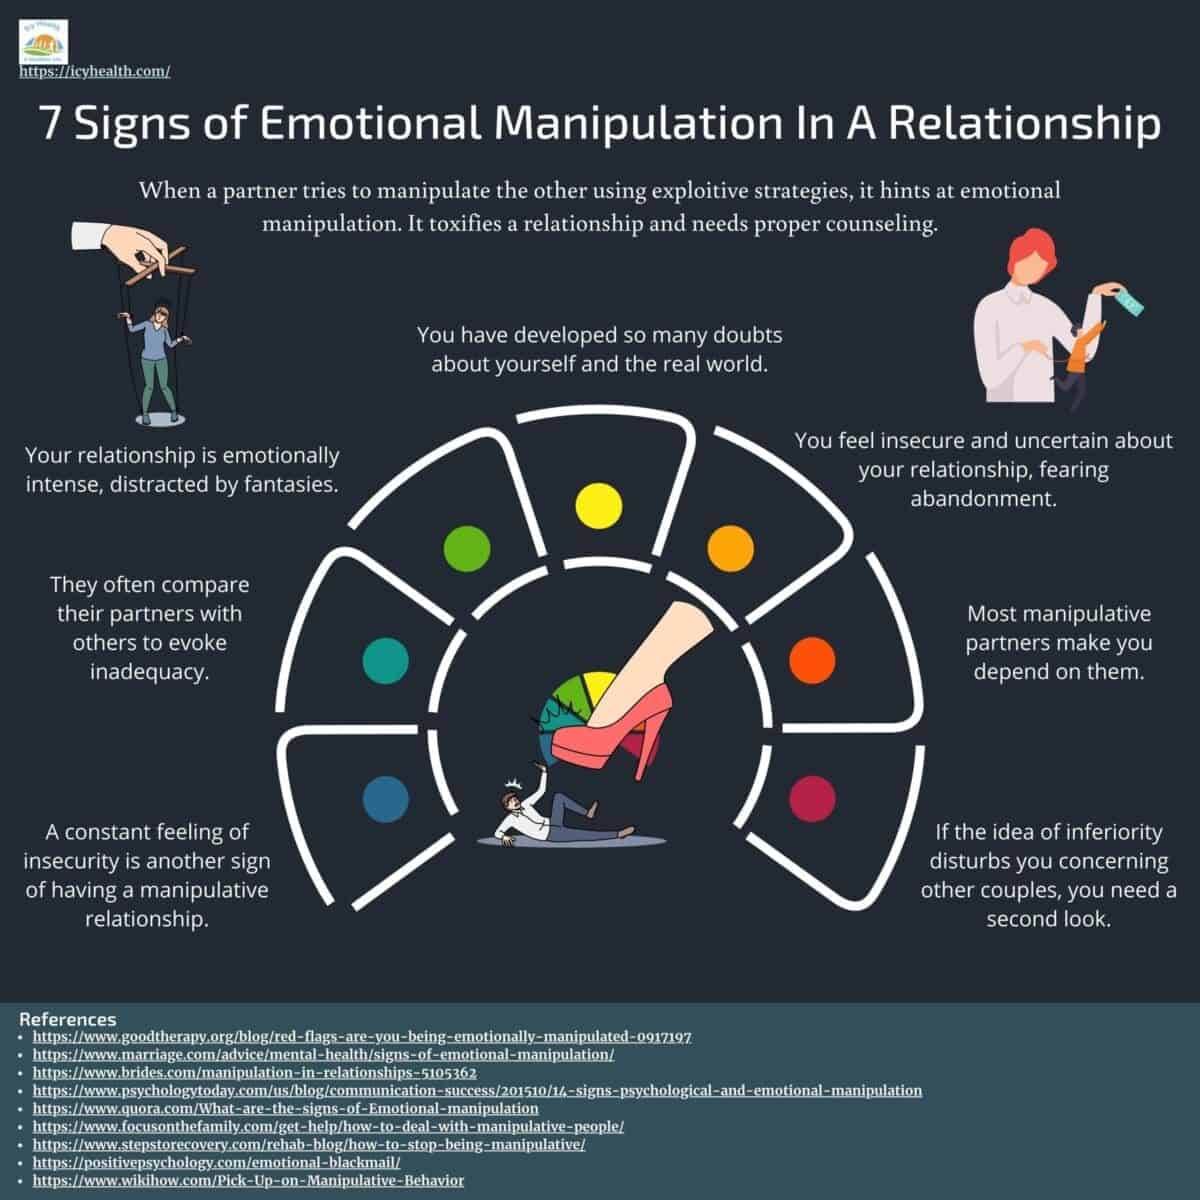 Infographic That Expalins The 7 Signs of Emotional Manipulation In A Relationship